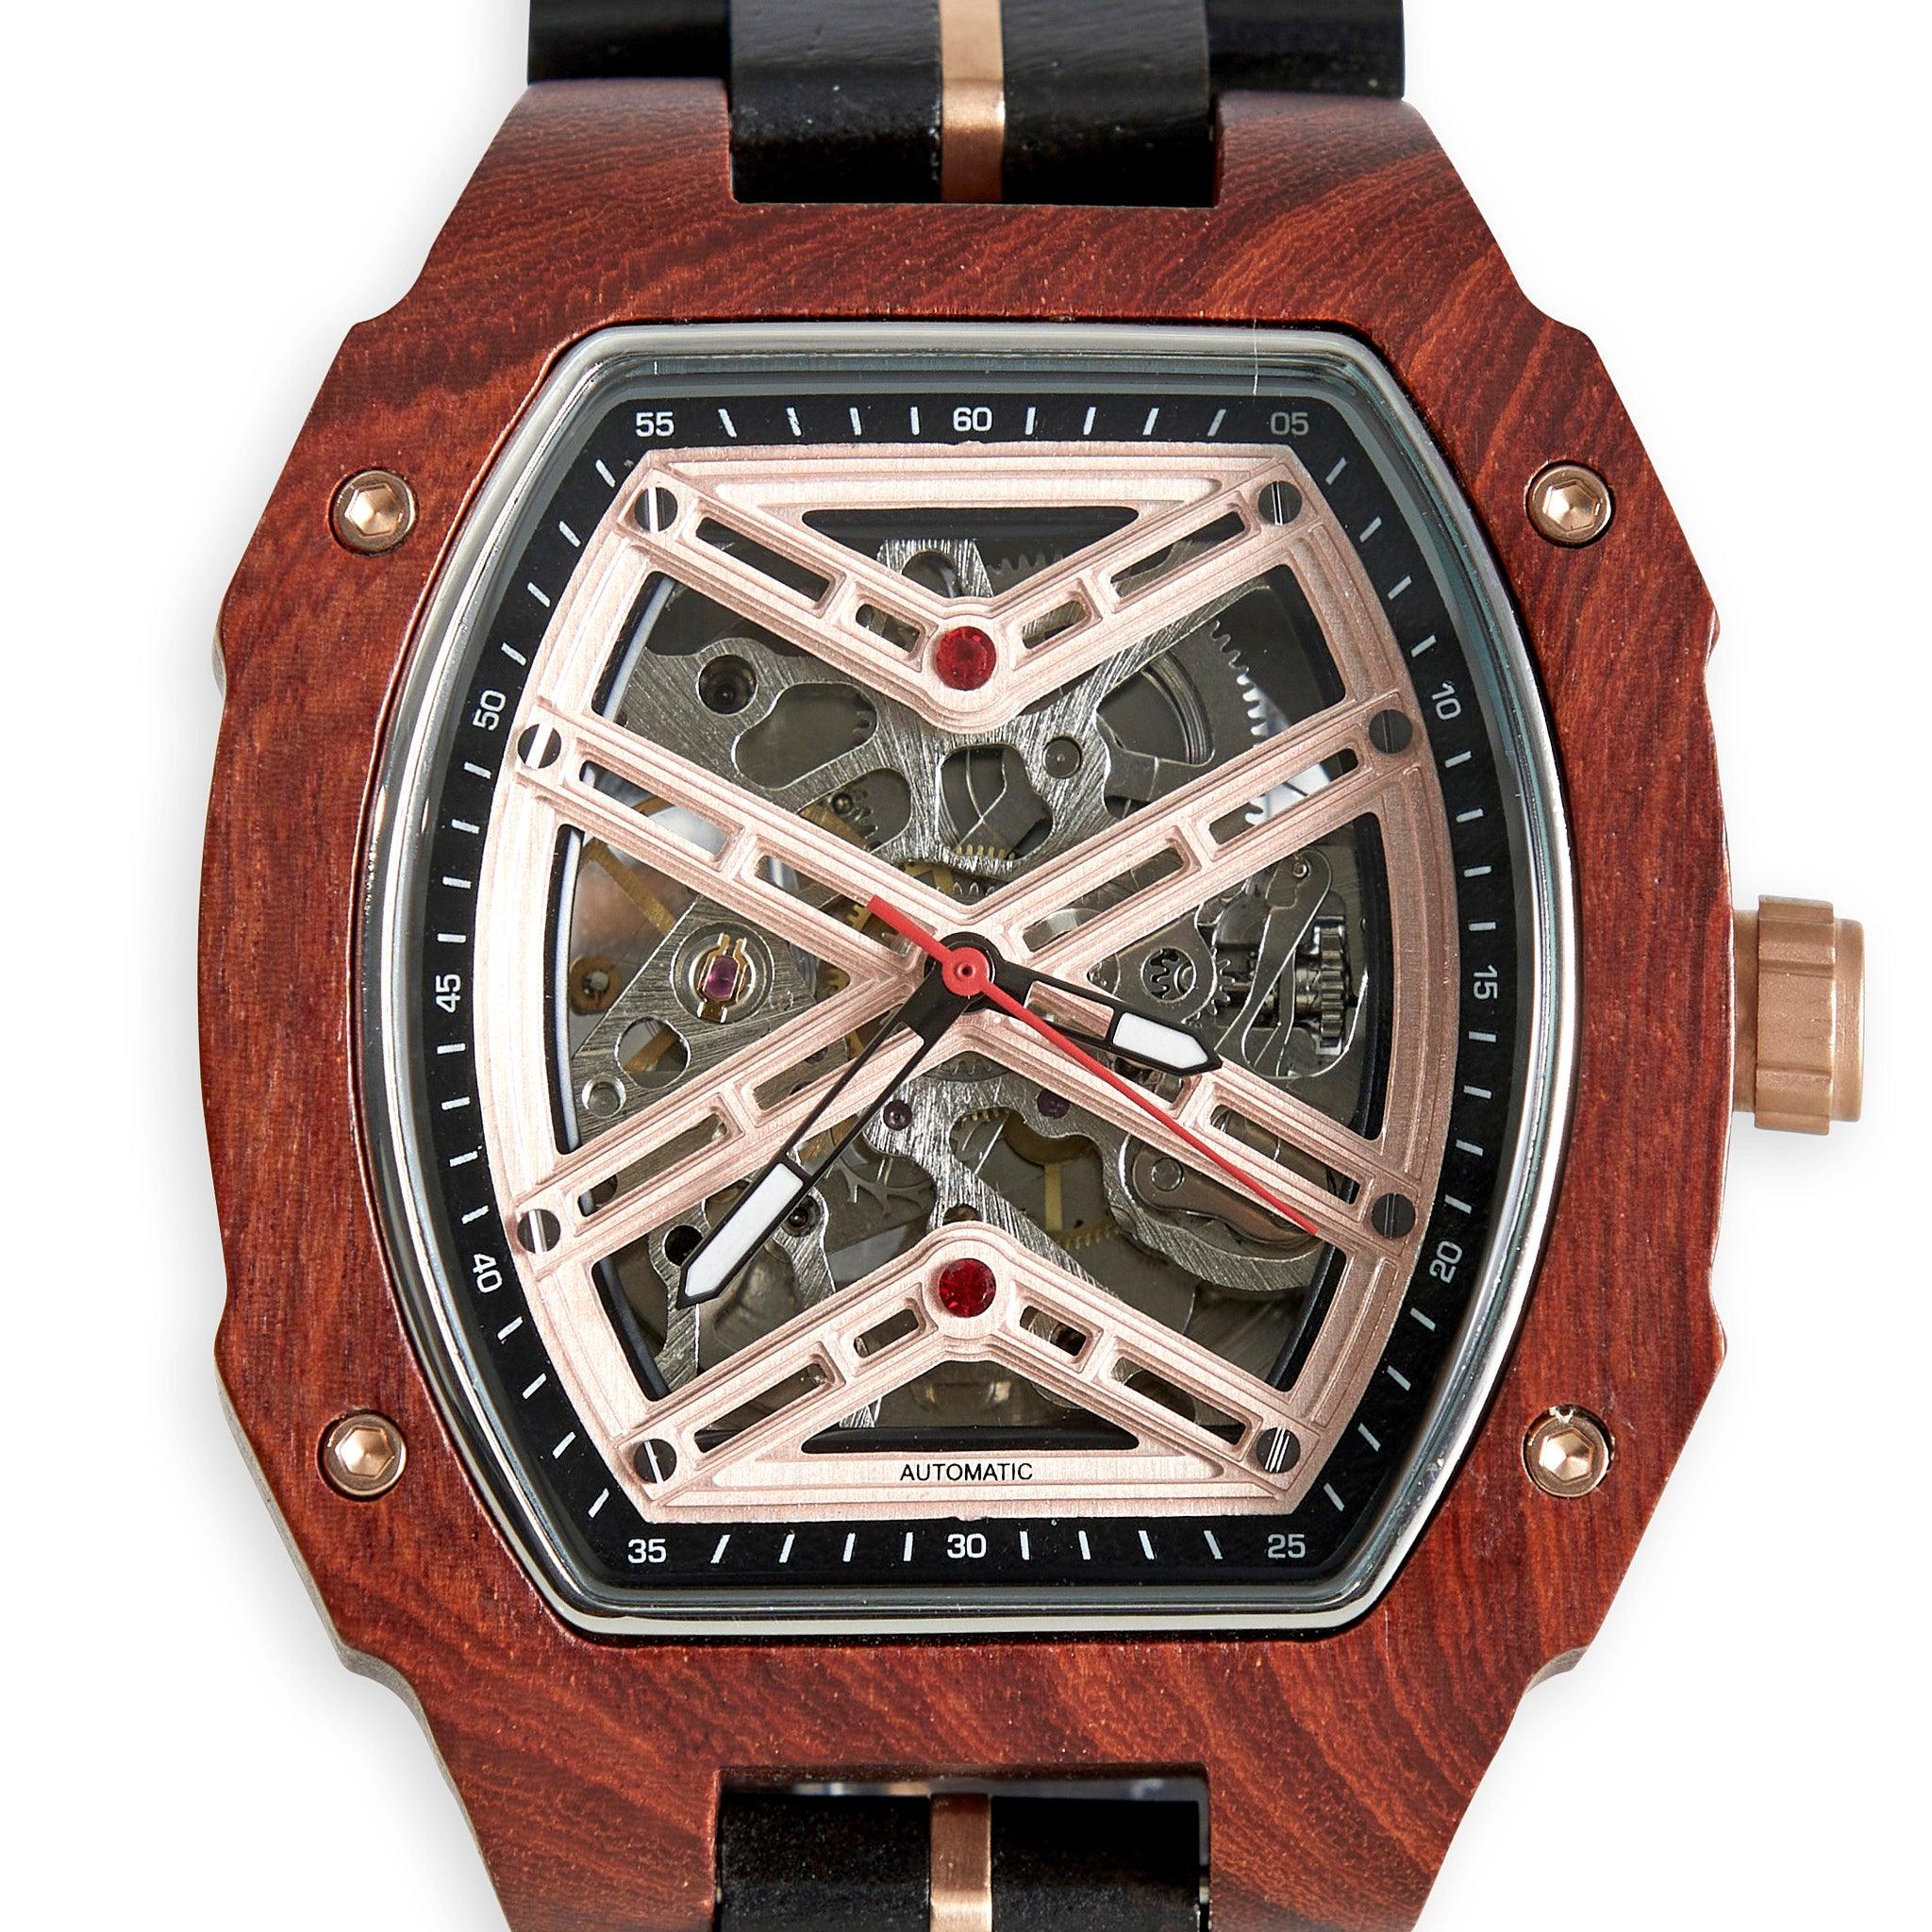 Mechanical Watches - The Sustainable Watch Company